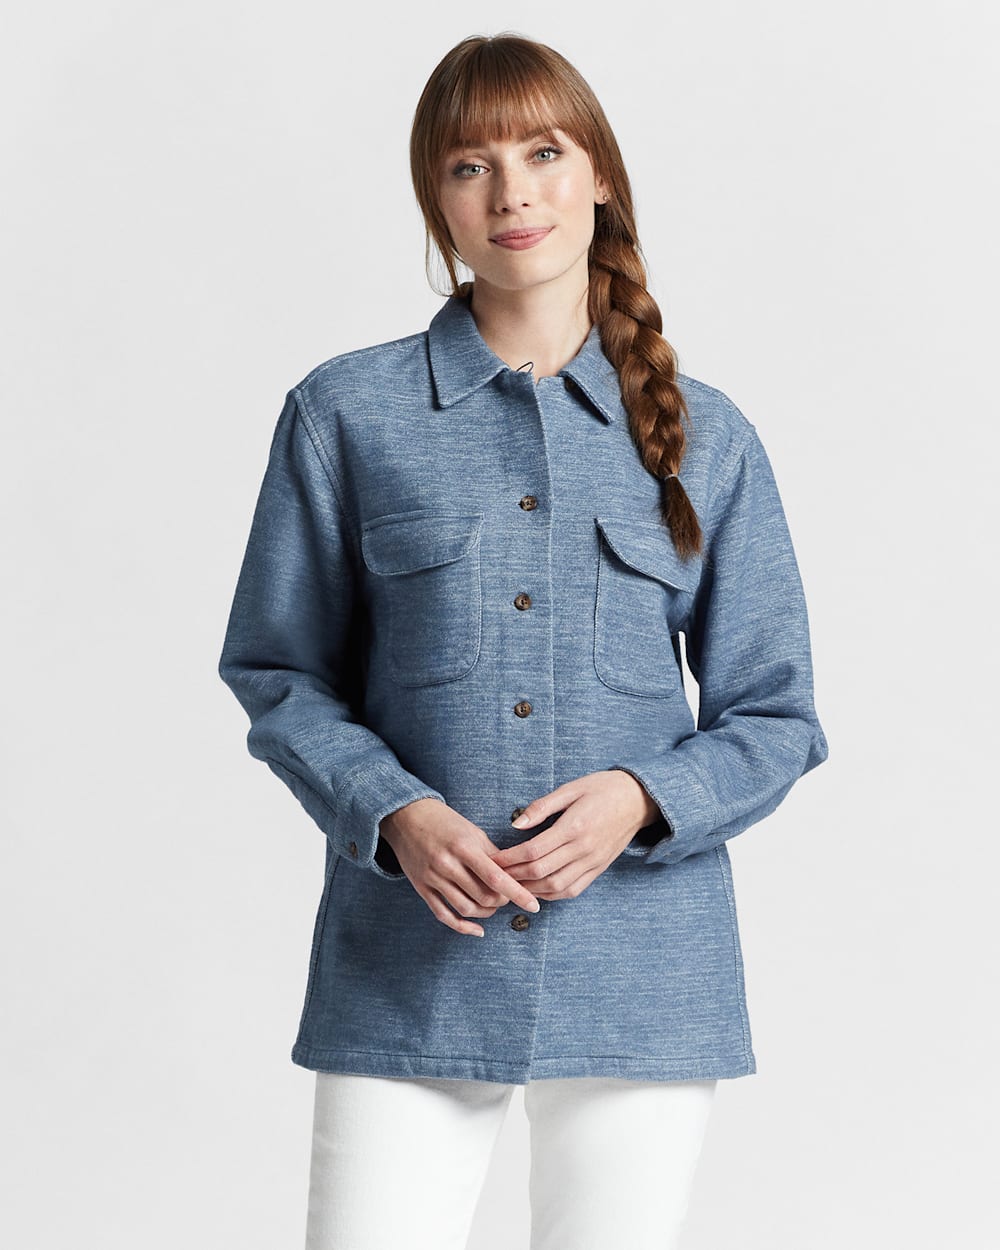 ALTERNATE VIEW OF WOMEN'S SOLID DOUBLESOFT BOARD SHIRT IN BERING SEA BLUE image number 5